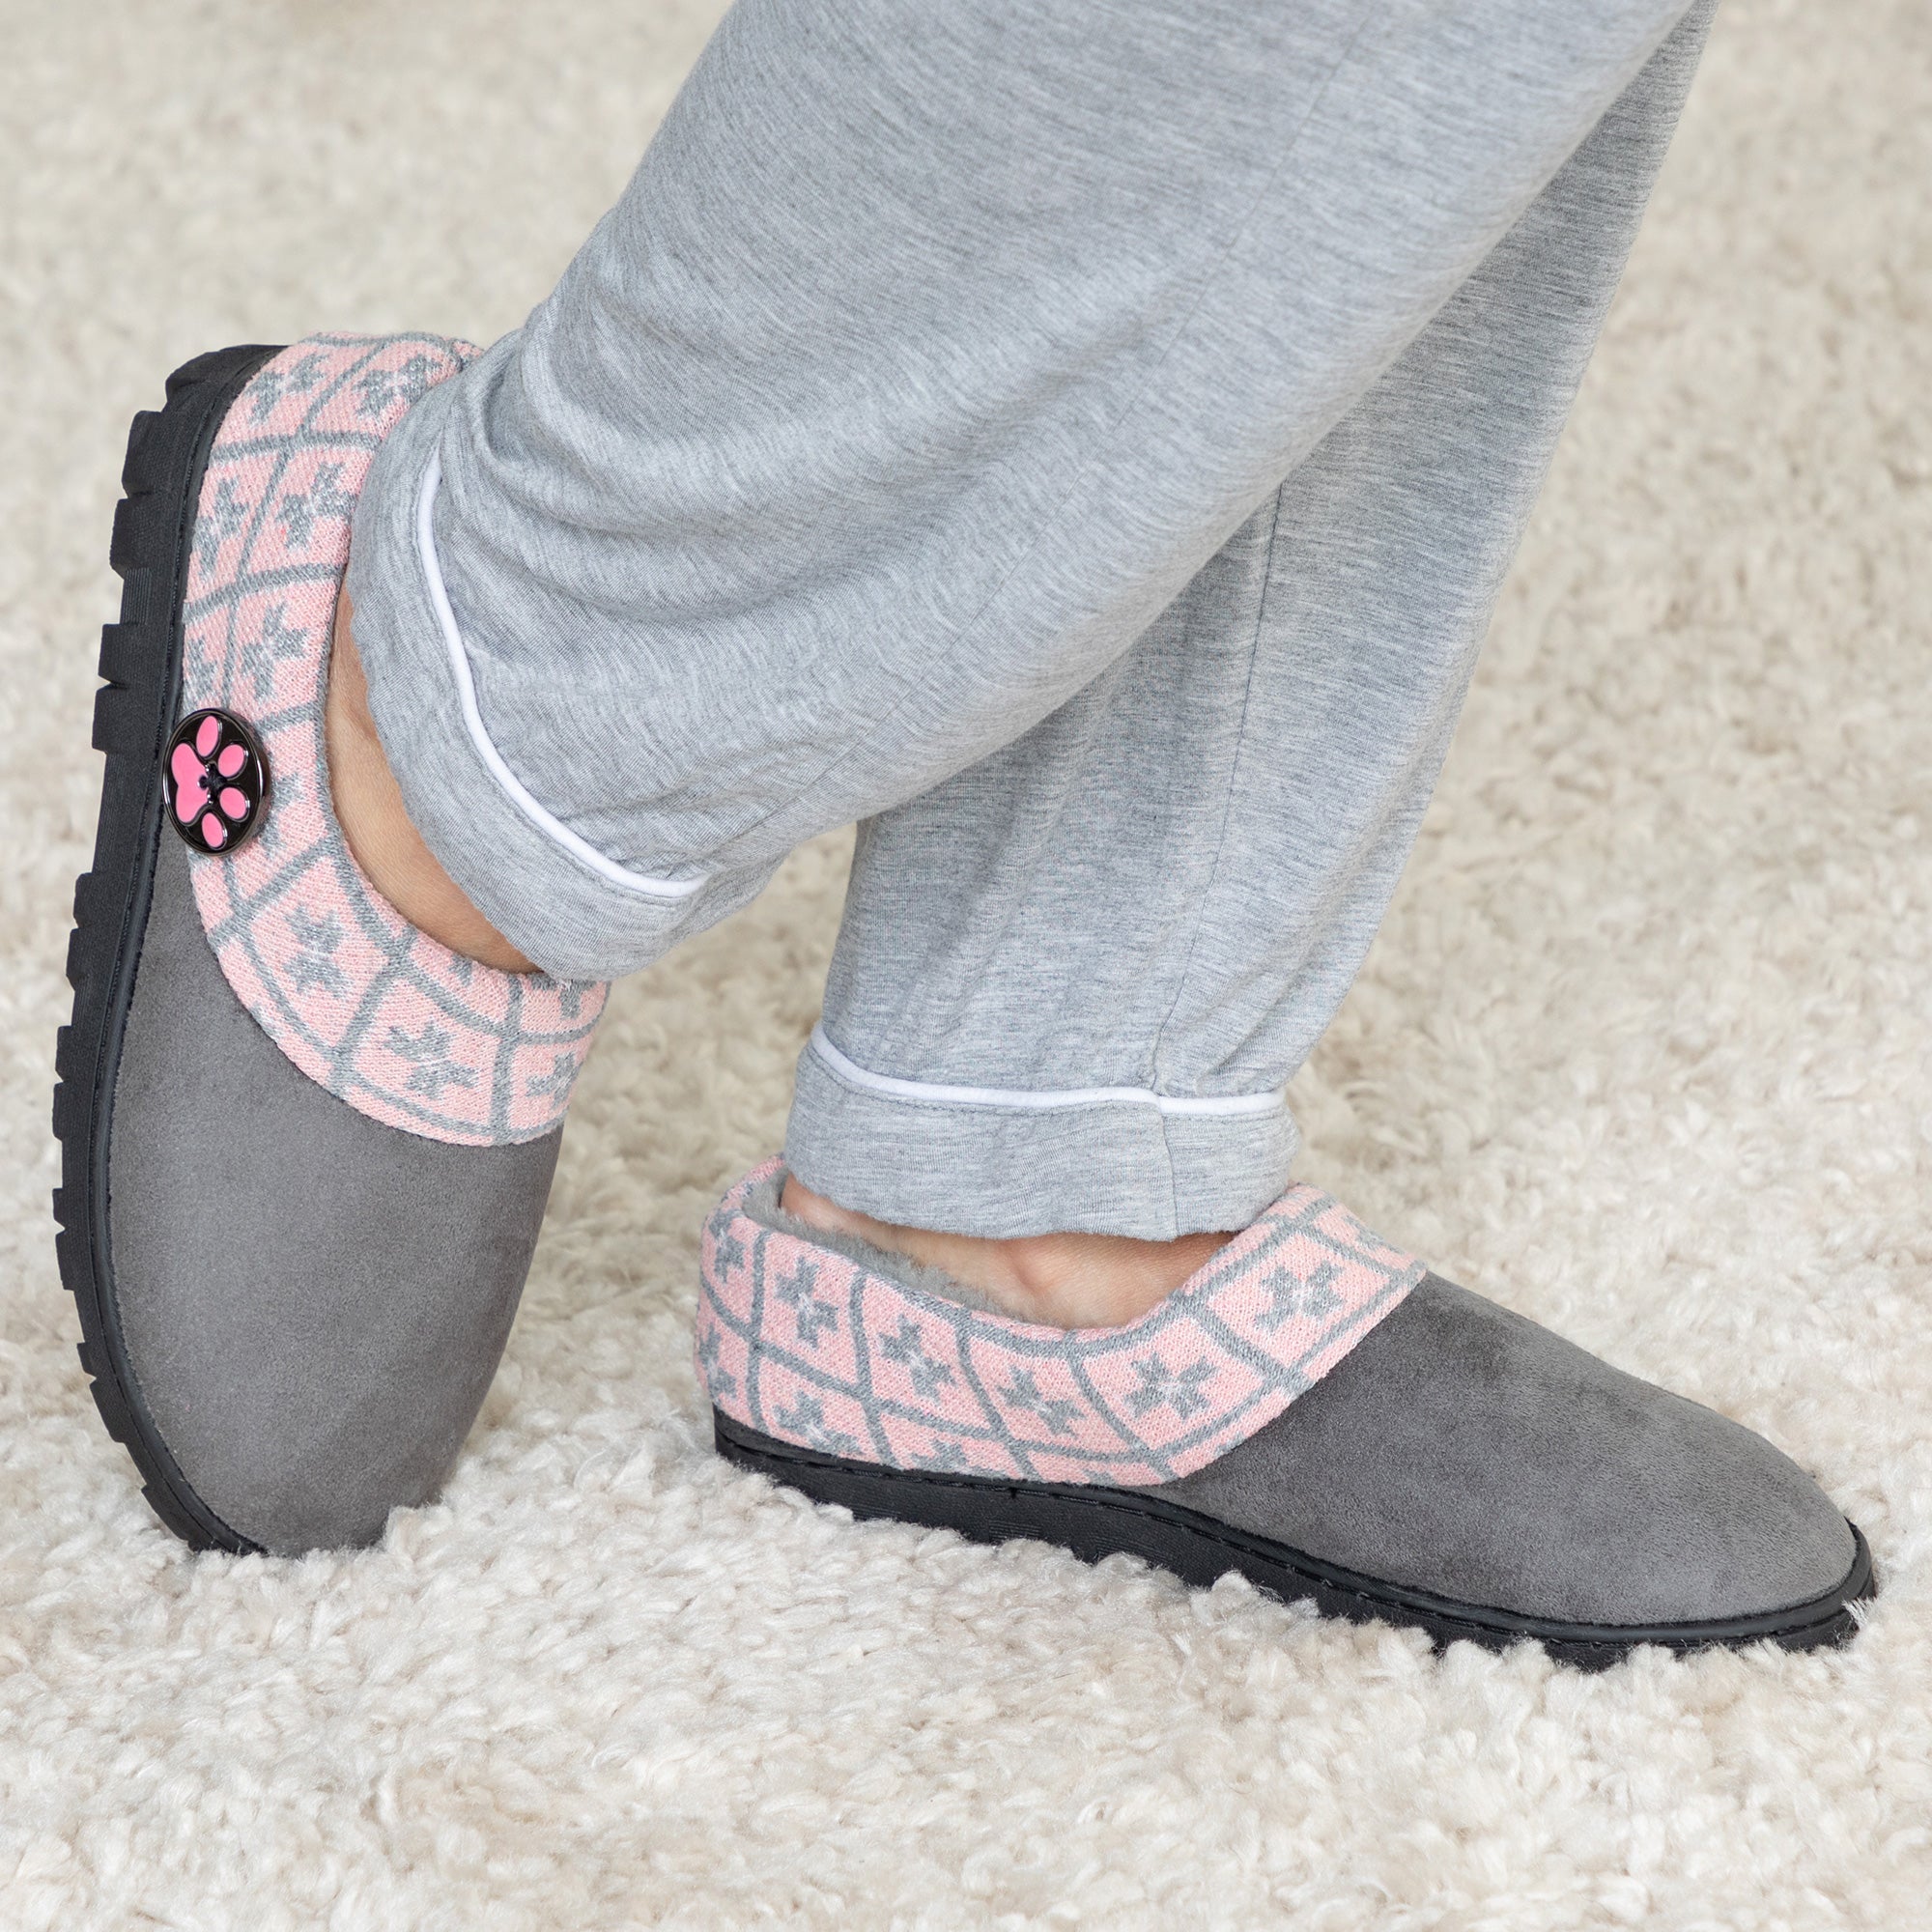 Purple Paw Women's Comfy Clog Slippers - Pink/Gray - 7